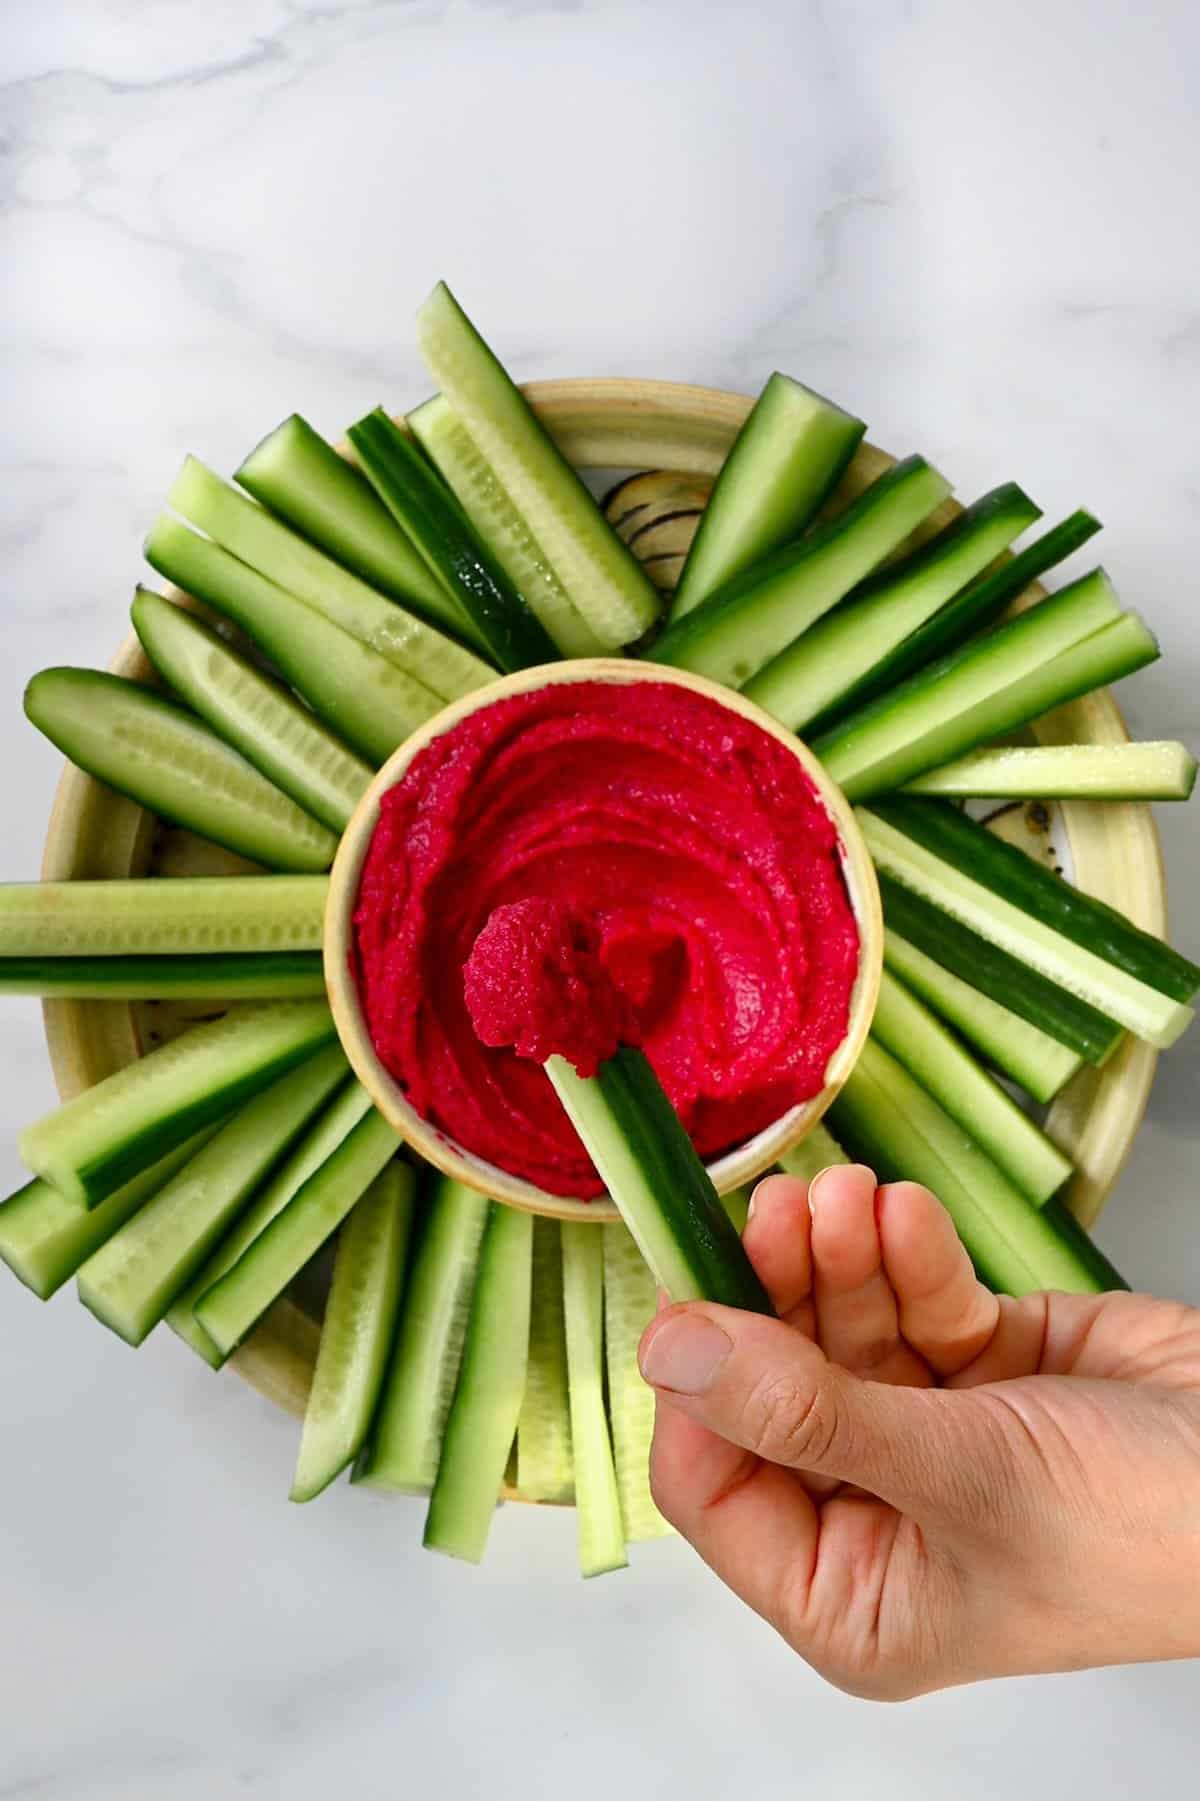 Eating beet hummus with a cucumber stick